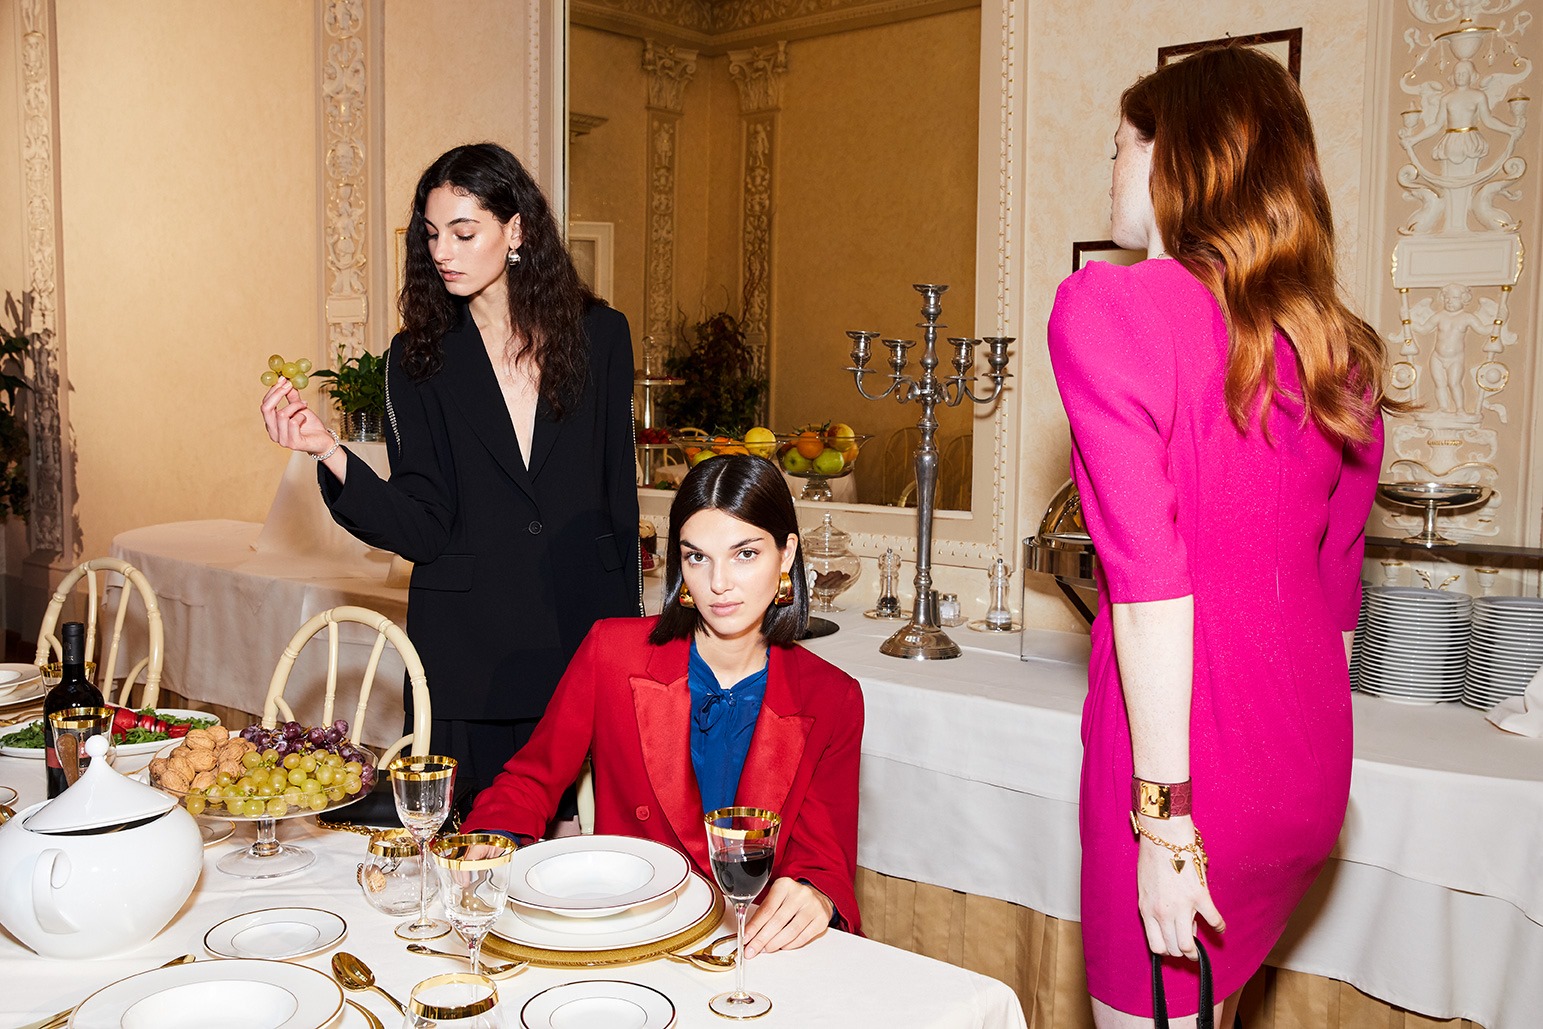 THE DINNER PARTY - Episode 2 Dinner is almost served: Julia, Talia and Emi take a seat. Red suit, powerful minidress and very special accessories to celebrate in style the most beautiful period of the year. SHOP party looks > festivalwalk #MARELLAdinnerparty